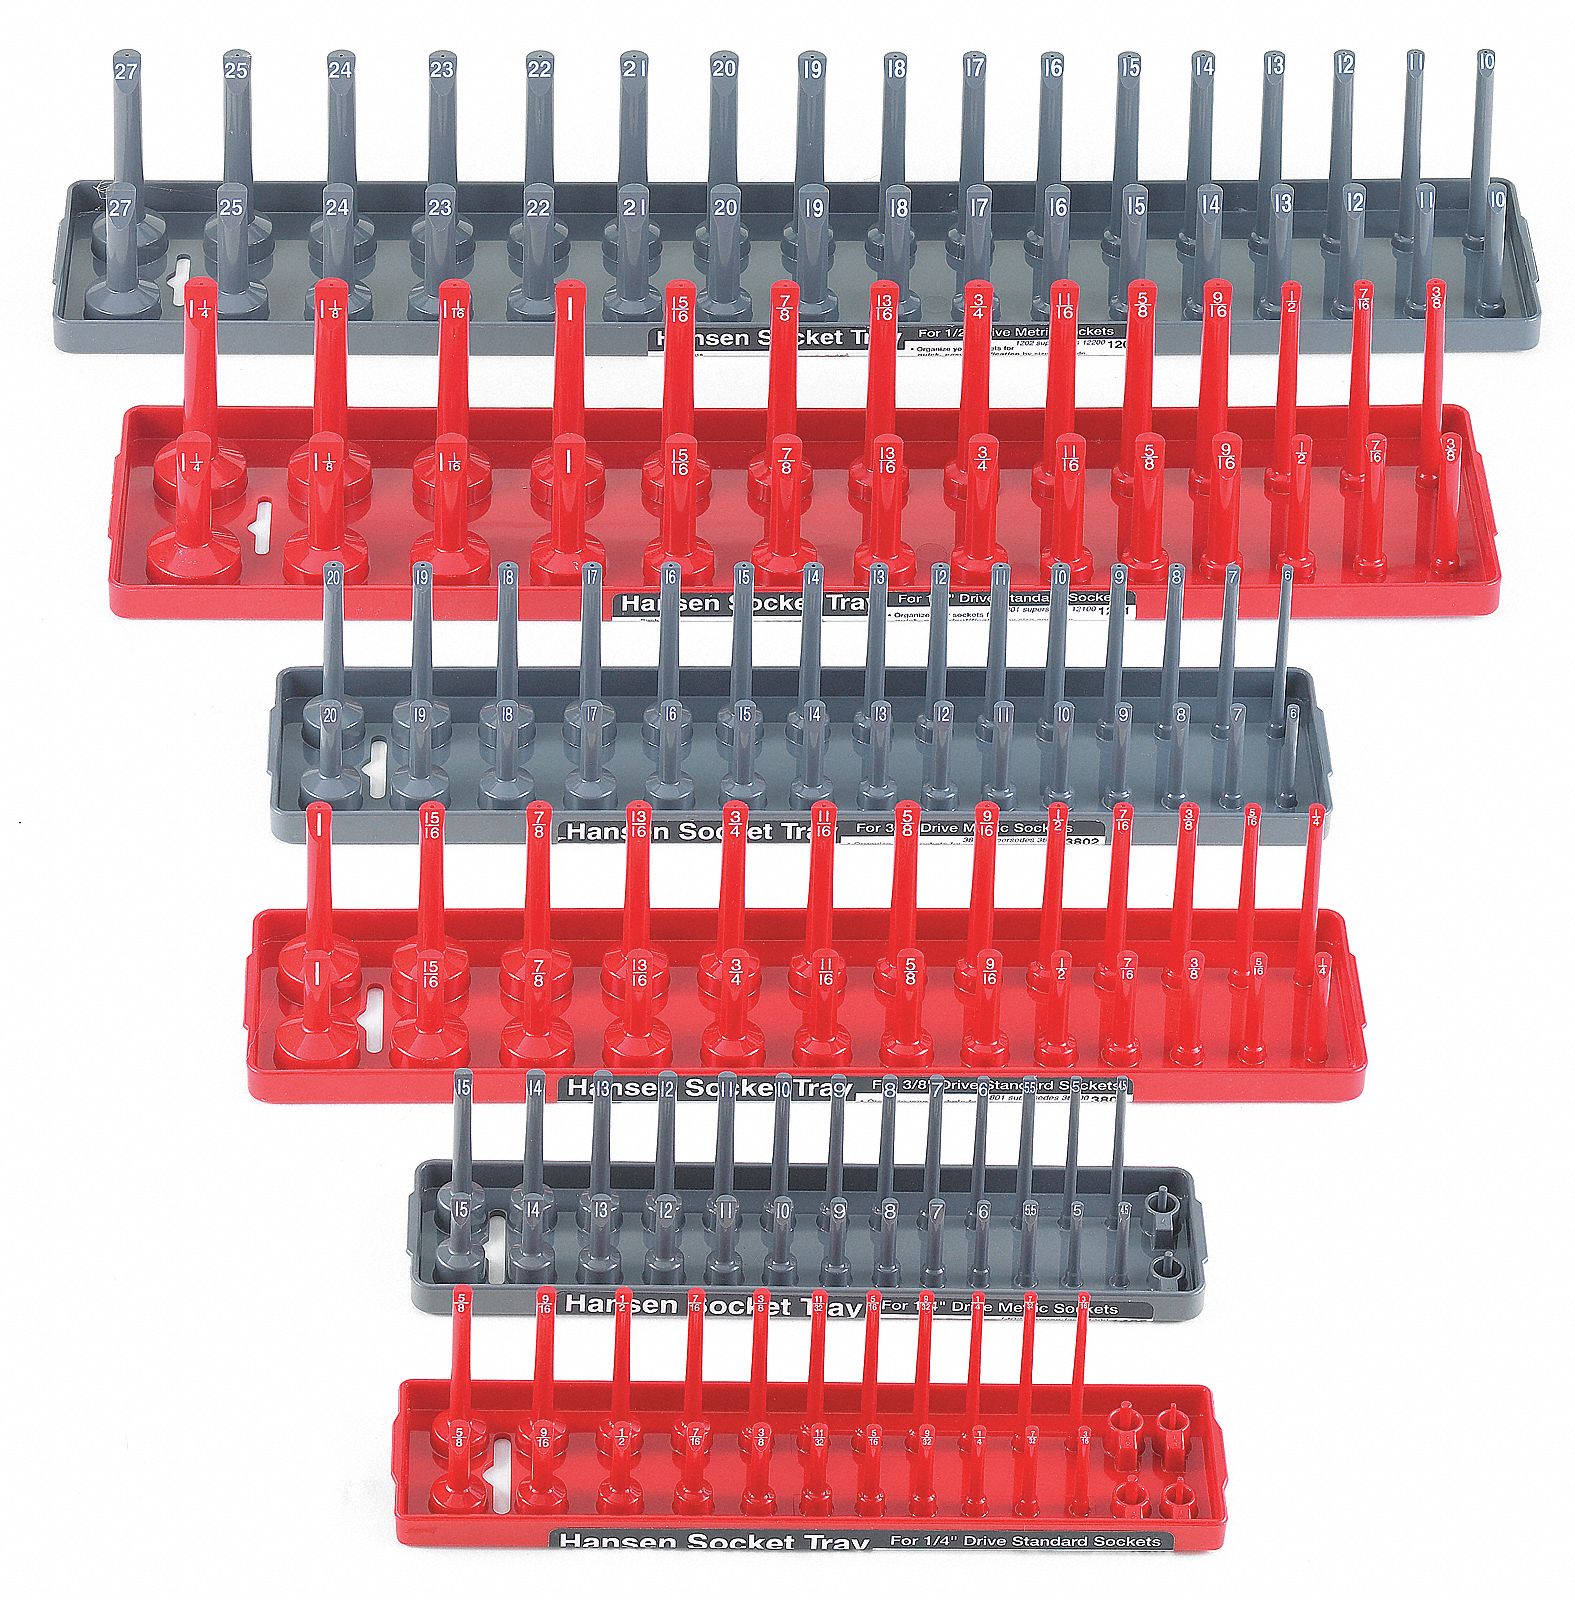 Socket Tray: Gray/Red, 8 in Overall Wd, 4 1/2 in Overall Ht, 118_28_30_34 Posts/Slots, 2 Rows